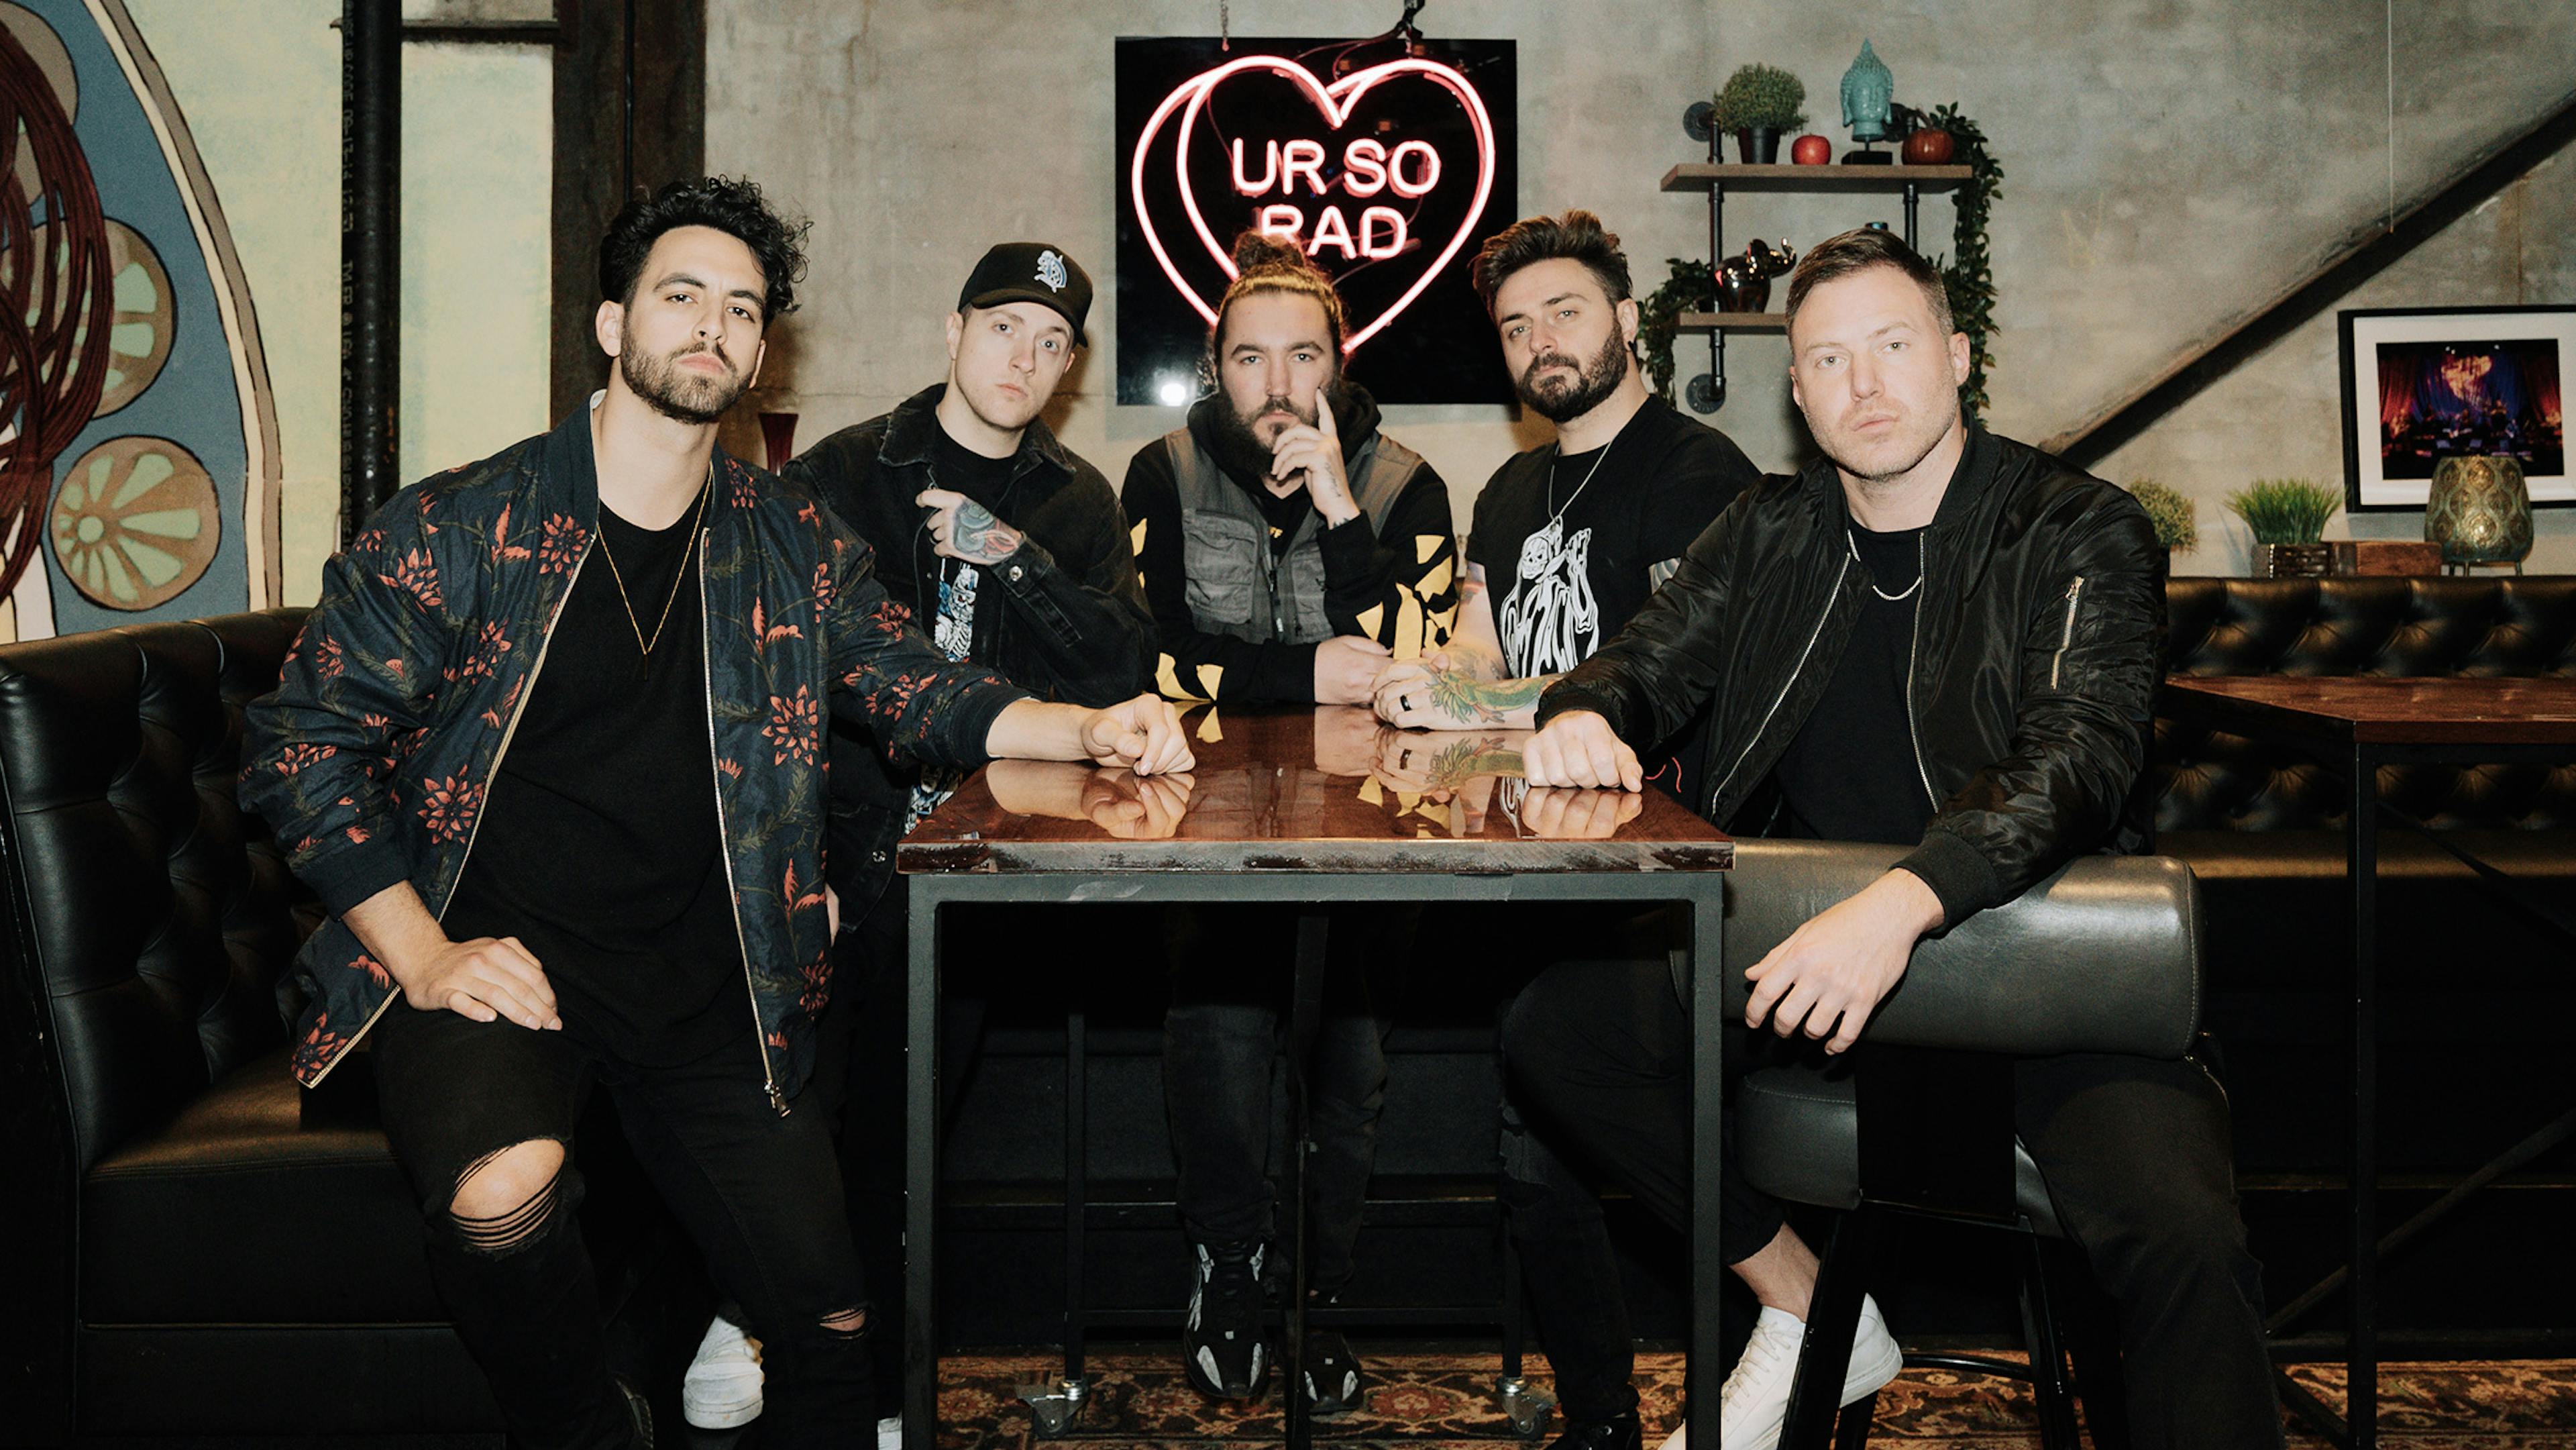 I Prevail: “Thirty years from now when we’re all 60, we want to still be doing this for a living”